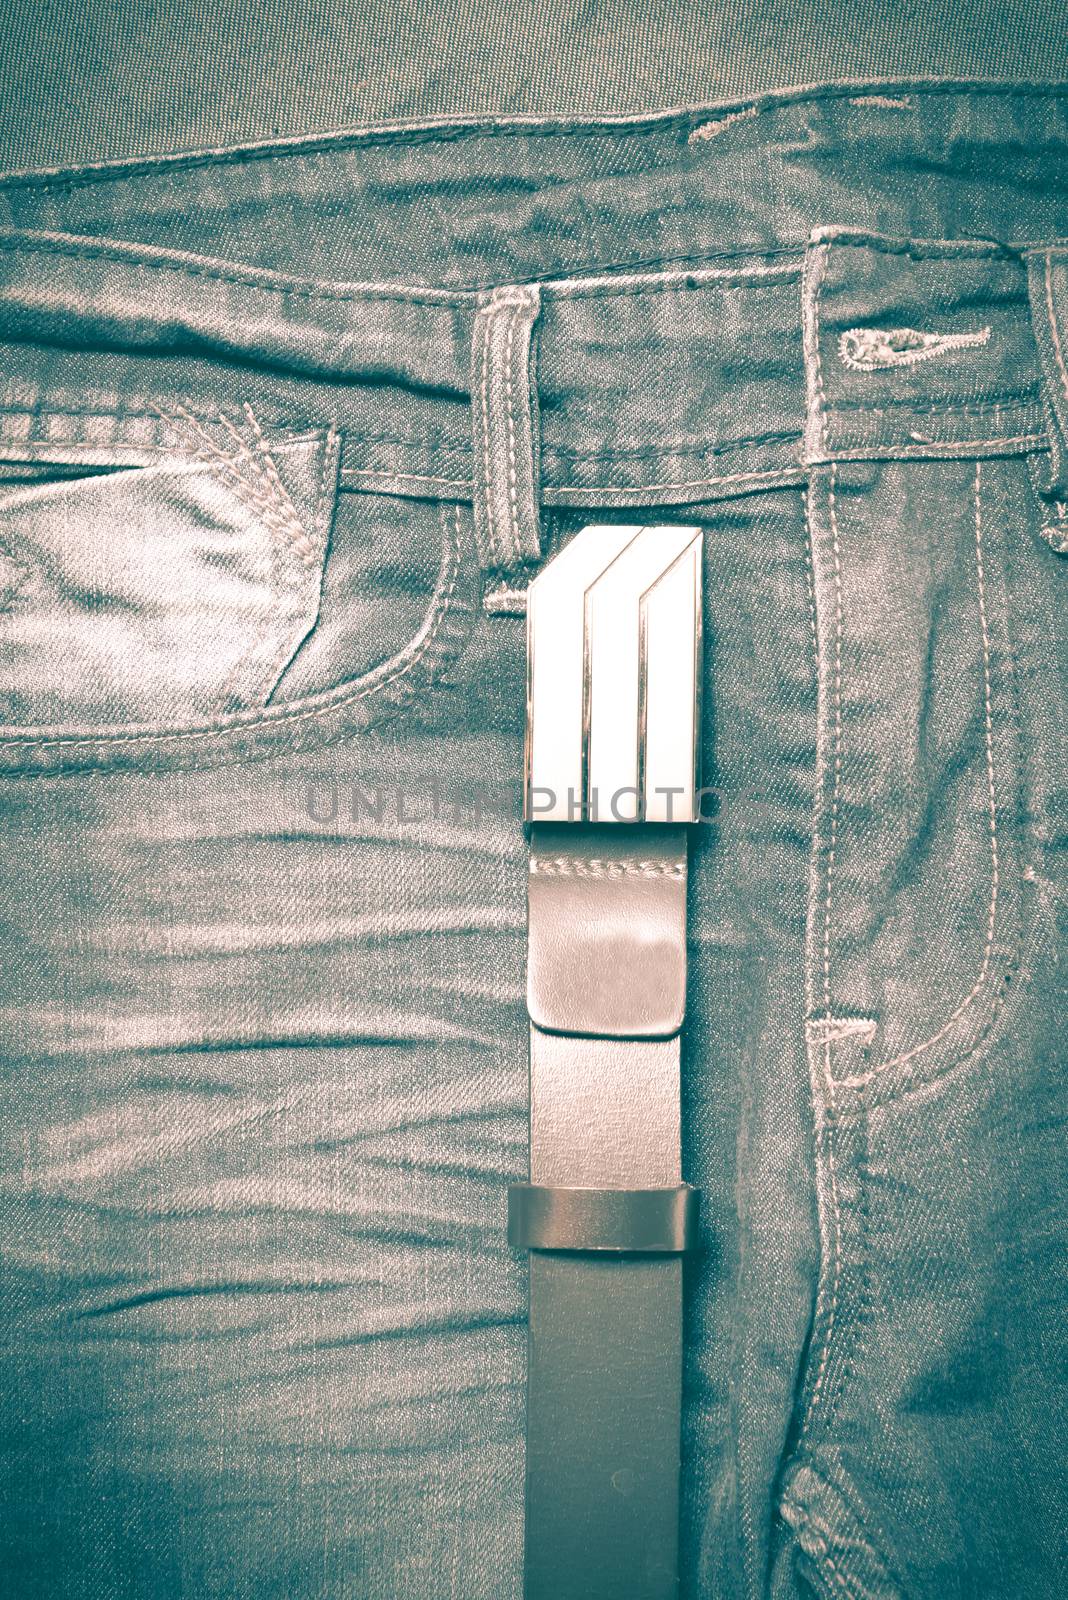 jean and leather belt